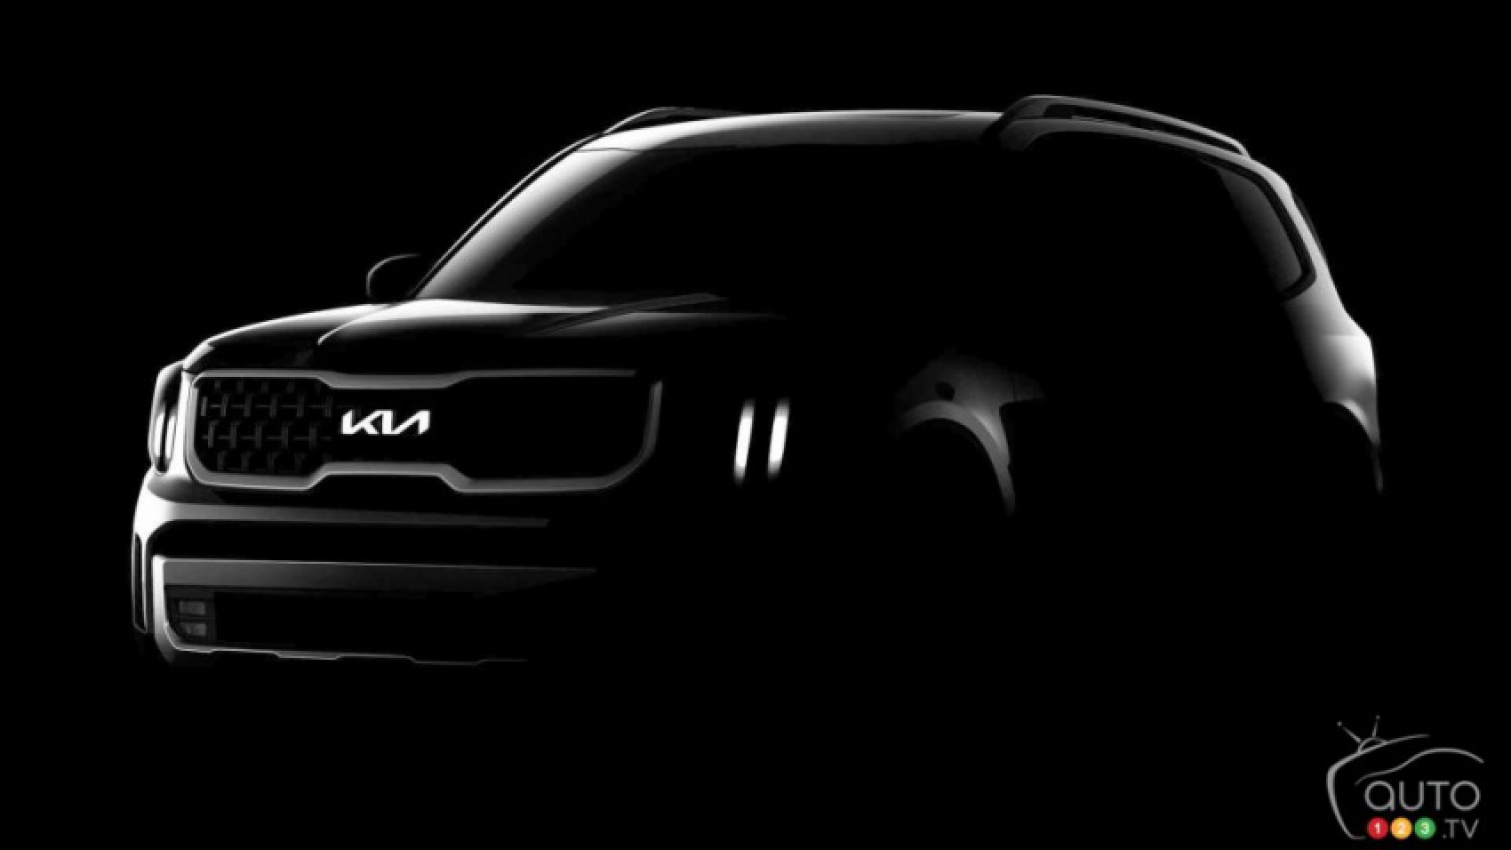 Kia Previews Updated 2023 Telluride Ahead of NY Auto Show Debut